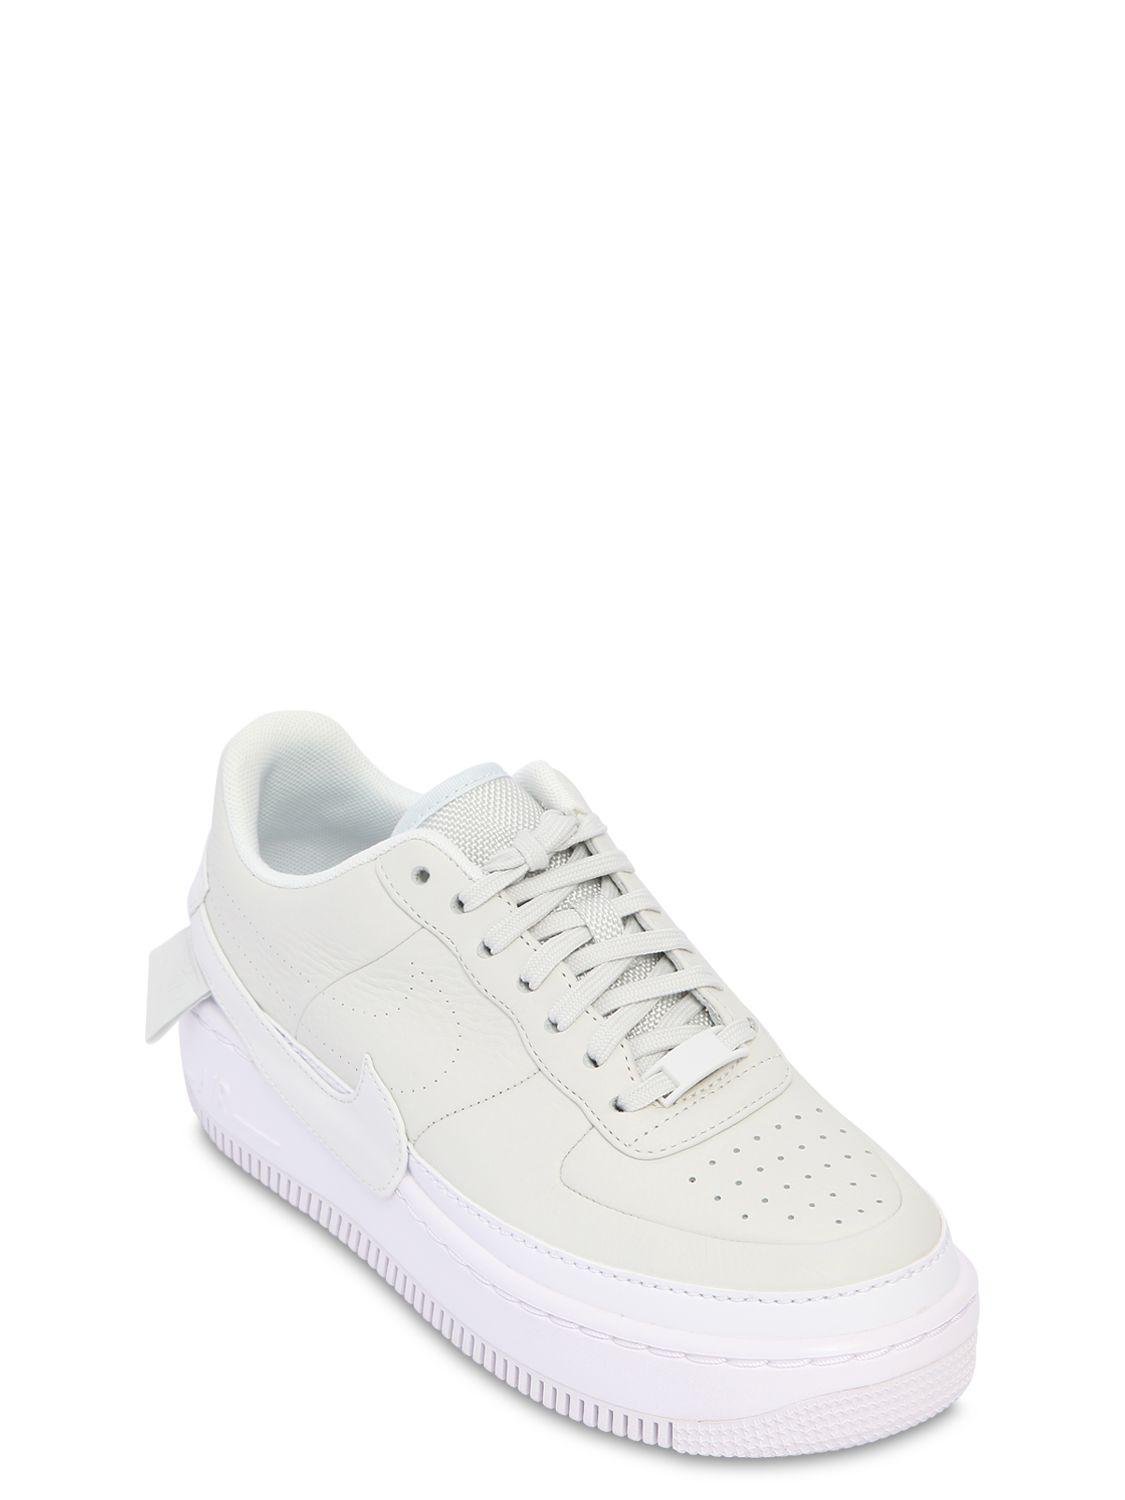 Repairman soft compliance Nike Air Force 1 Jester Xx Sneakers in White for Men | Lyst